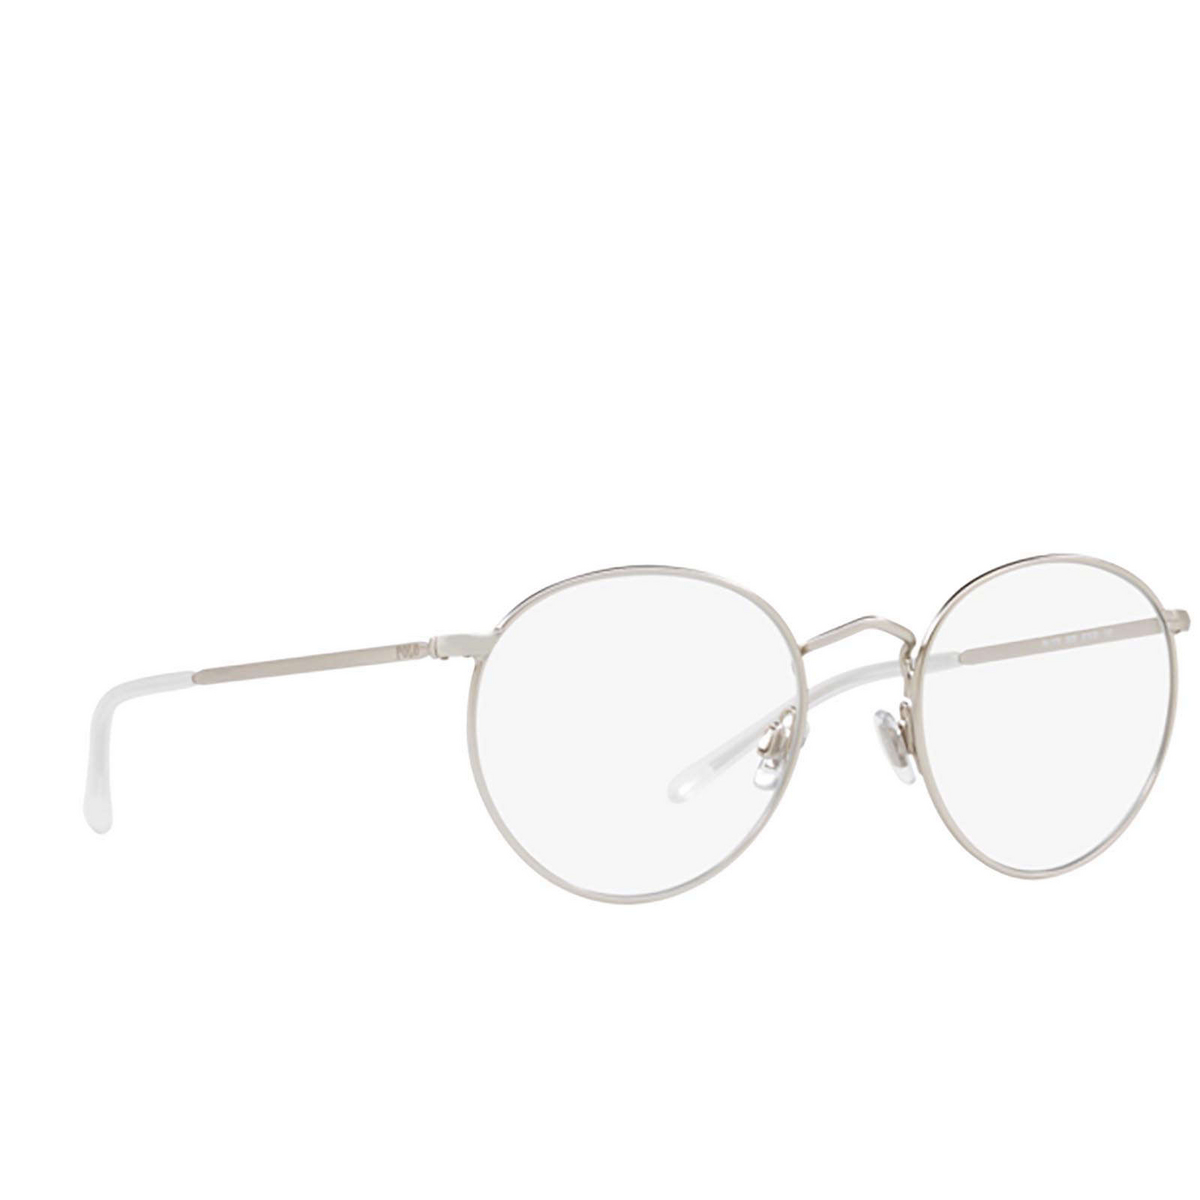 Polo Ralph Lauren® Round Eyeglasses: PH1179 color Semi-shiny Brushed Silver 9326 - 2/3.